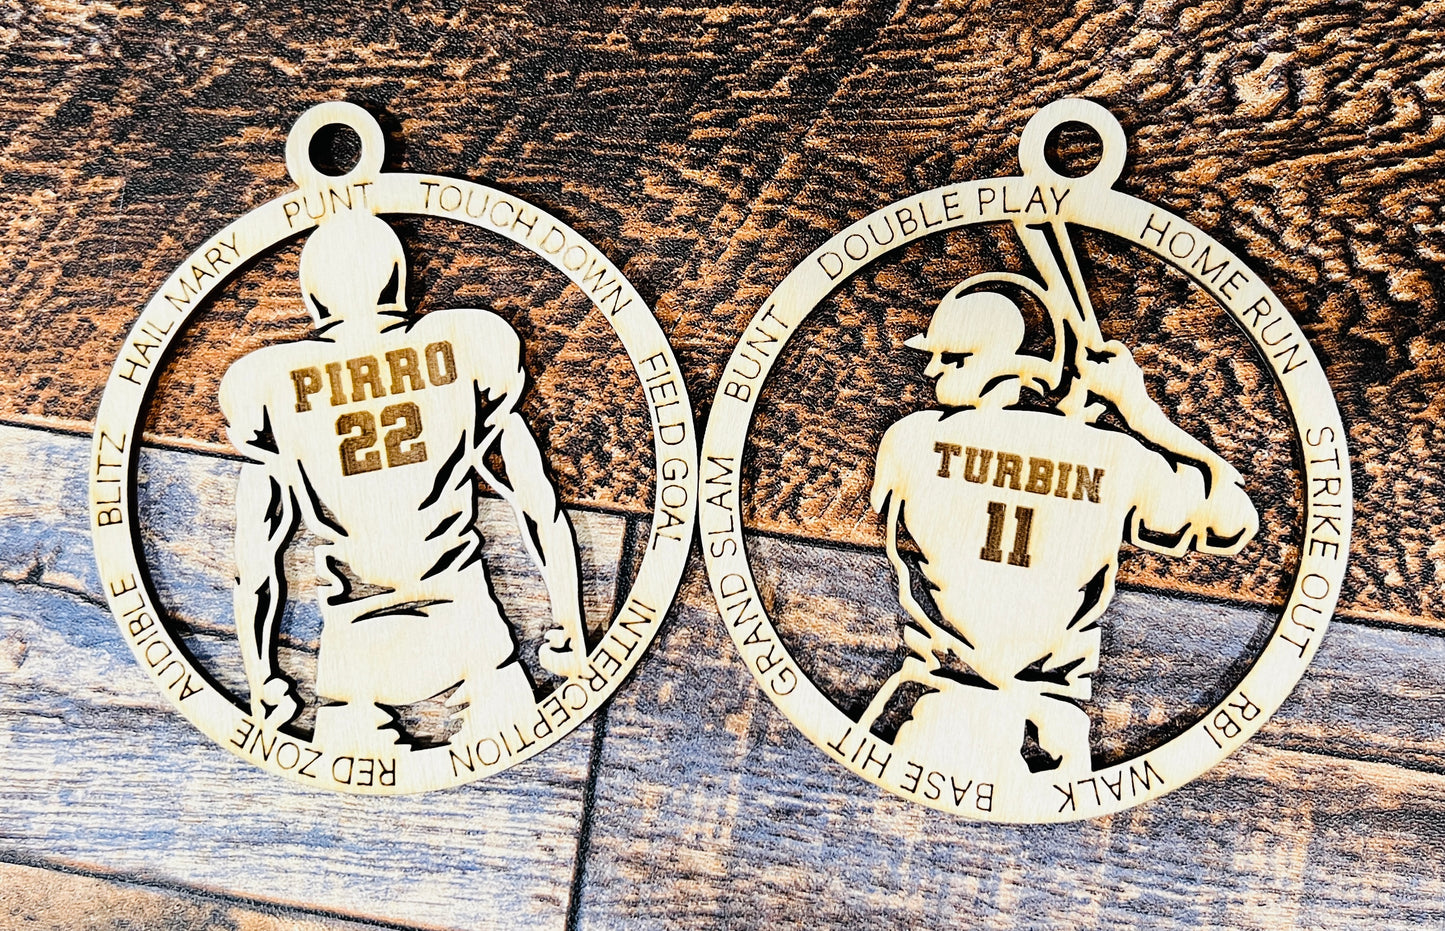 Personalized Sports Christmas Ornaments